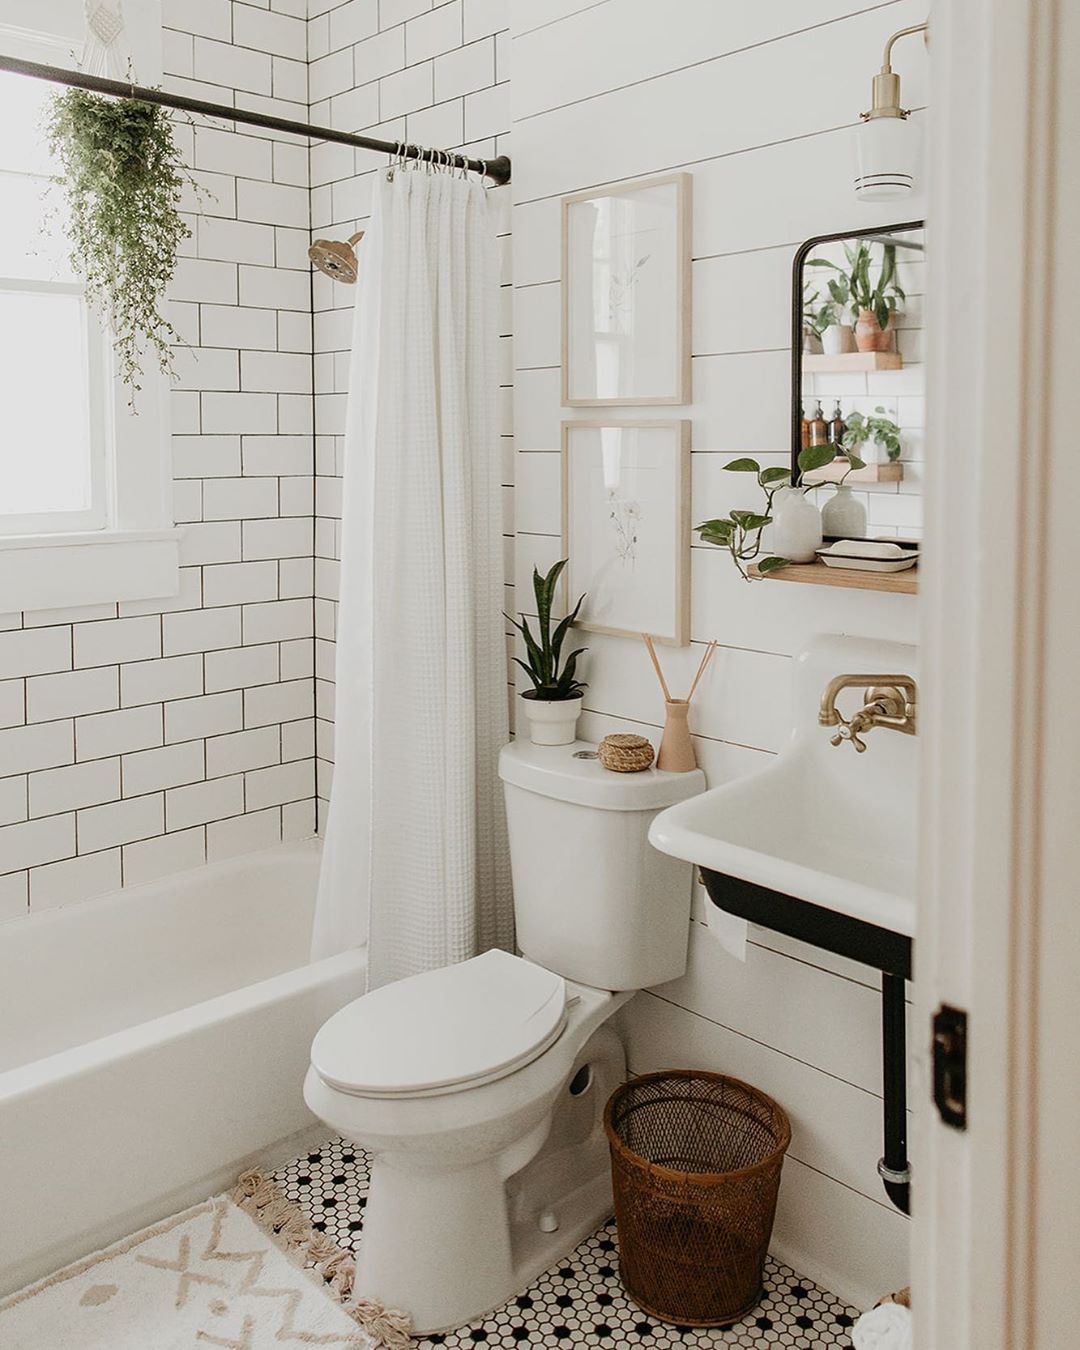 new bathroom with shiplap on the wall and subway tiles in shower and pedestal sink photo by Instagram user @carlanatalia__